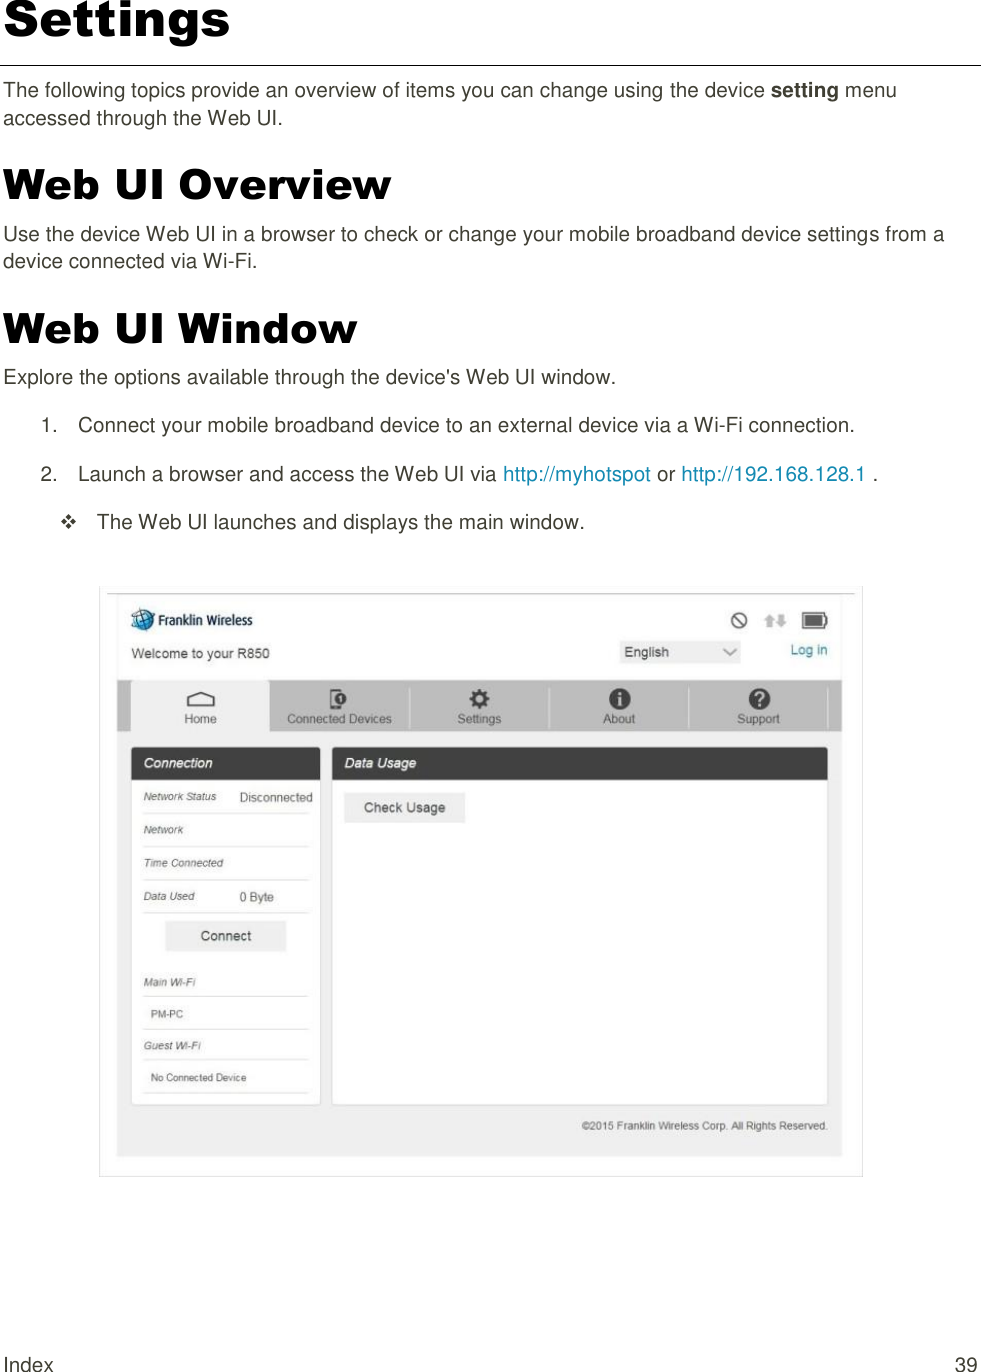 Index  39 Settings The following topics provide an overview of items you can change using the device setting menu accessed through the Web UI. Web UI Overview Use the device Web UI in a browser to check or change your mobile broadband device settings from a device connected via Wi-Fi. Web UI Window Explore the options available through the device&apos;s Web UI window. 1.  Connect your mobile broadband device to an external device via a Wi-Fi connection. 2.  Launch a browser and access the Web UI via http://myhotspot or http://192.168.128.1 .   The Web UI launches and displays the main window.     